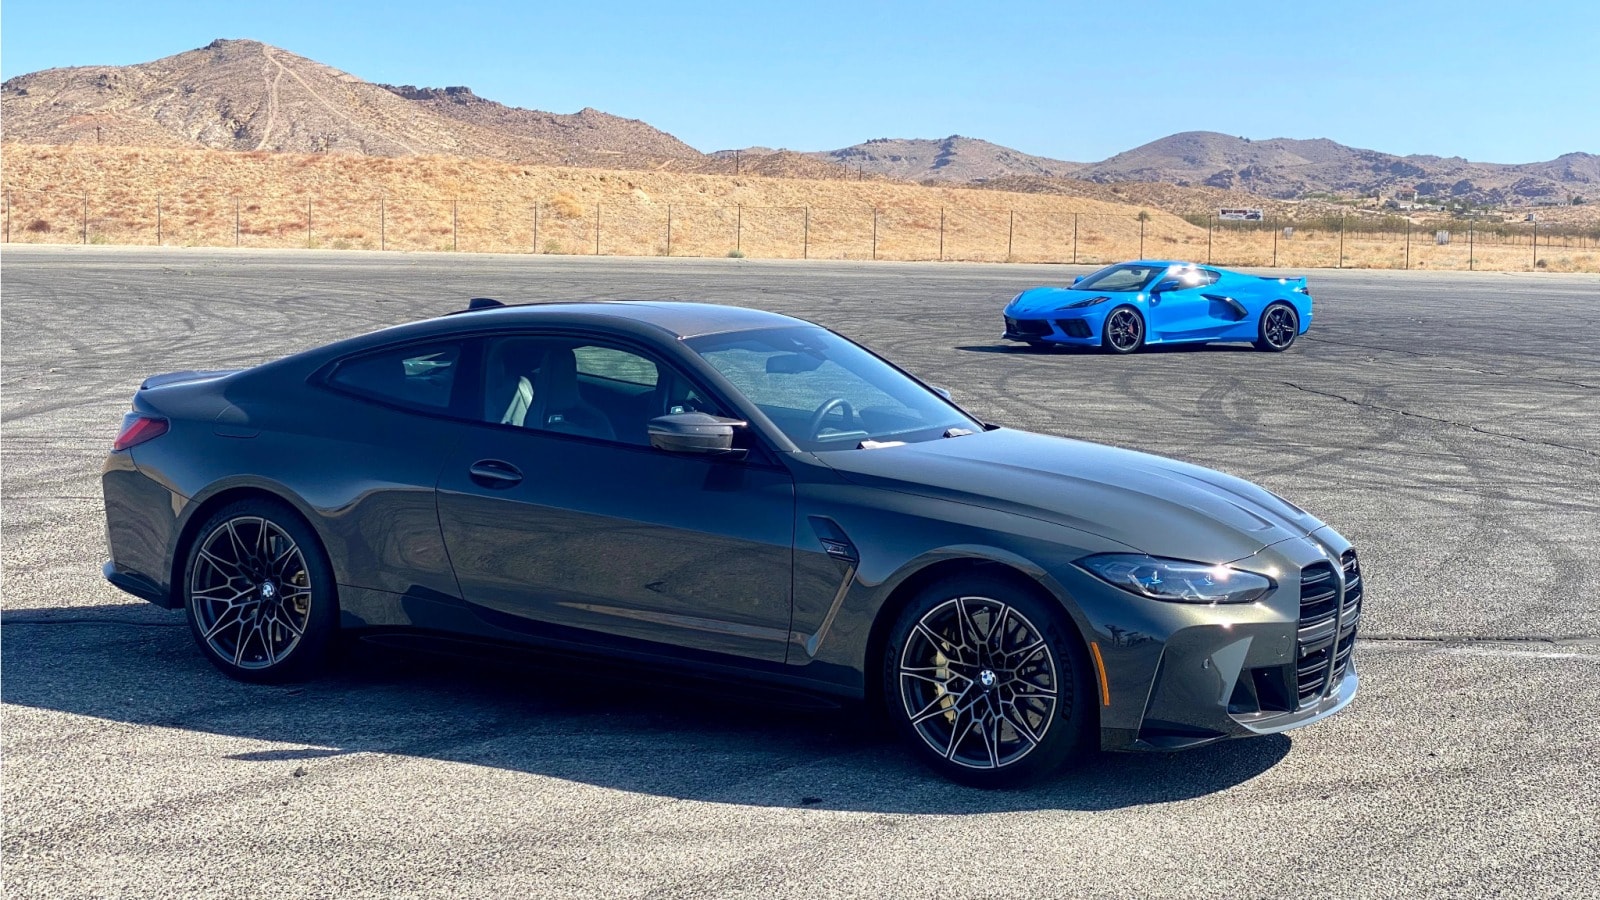 BMW M4 vs. Chevrolet Corvette C8: In Search of the Best Sports Car